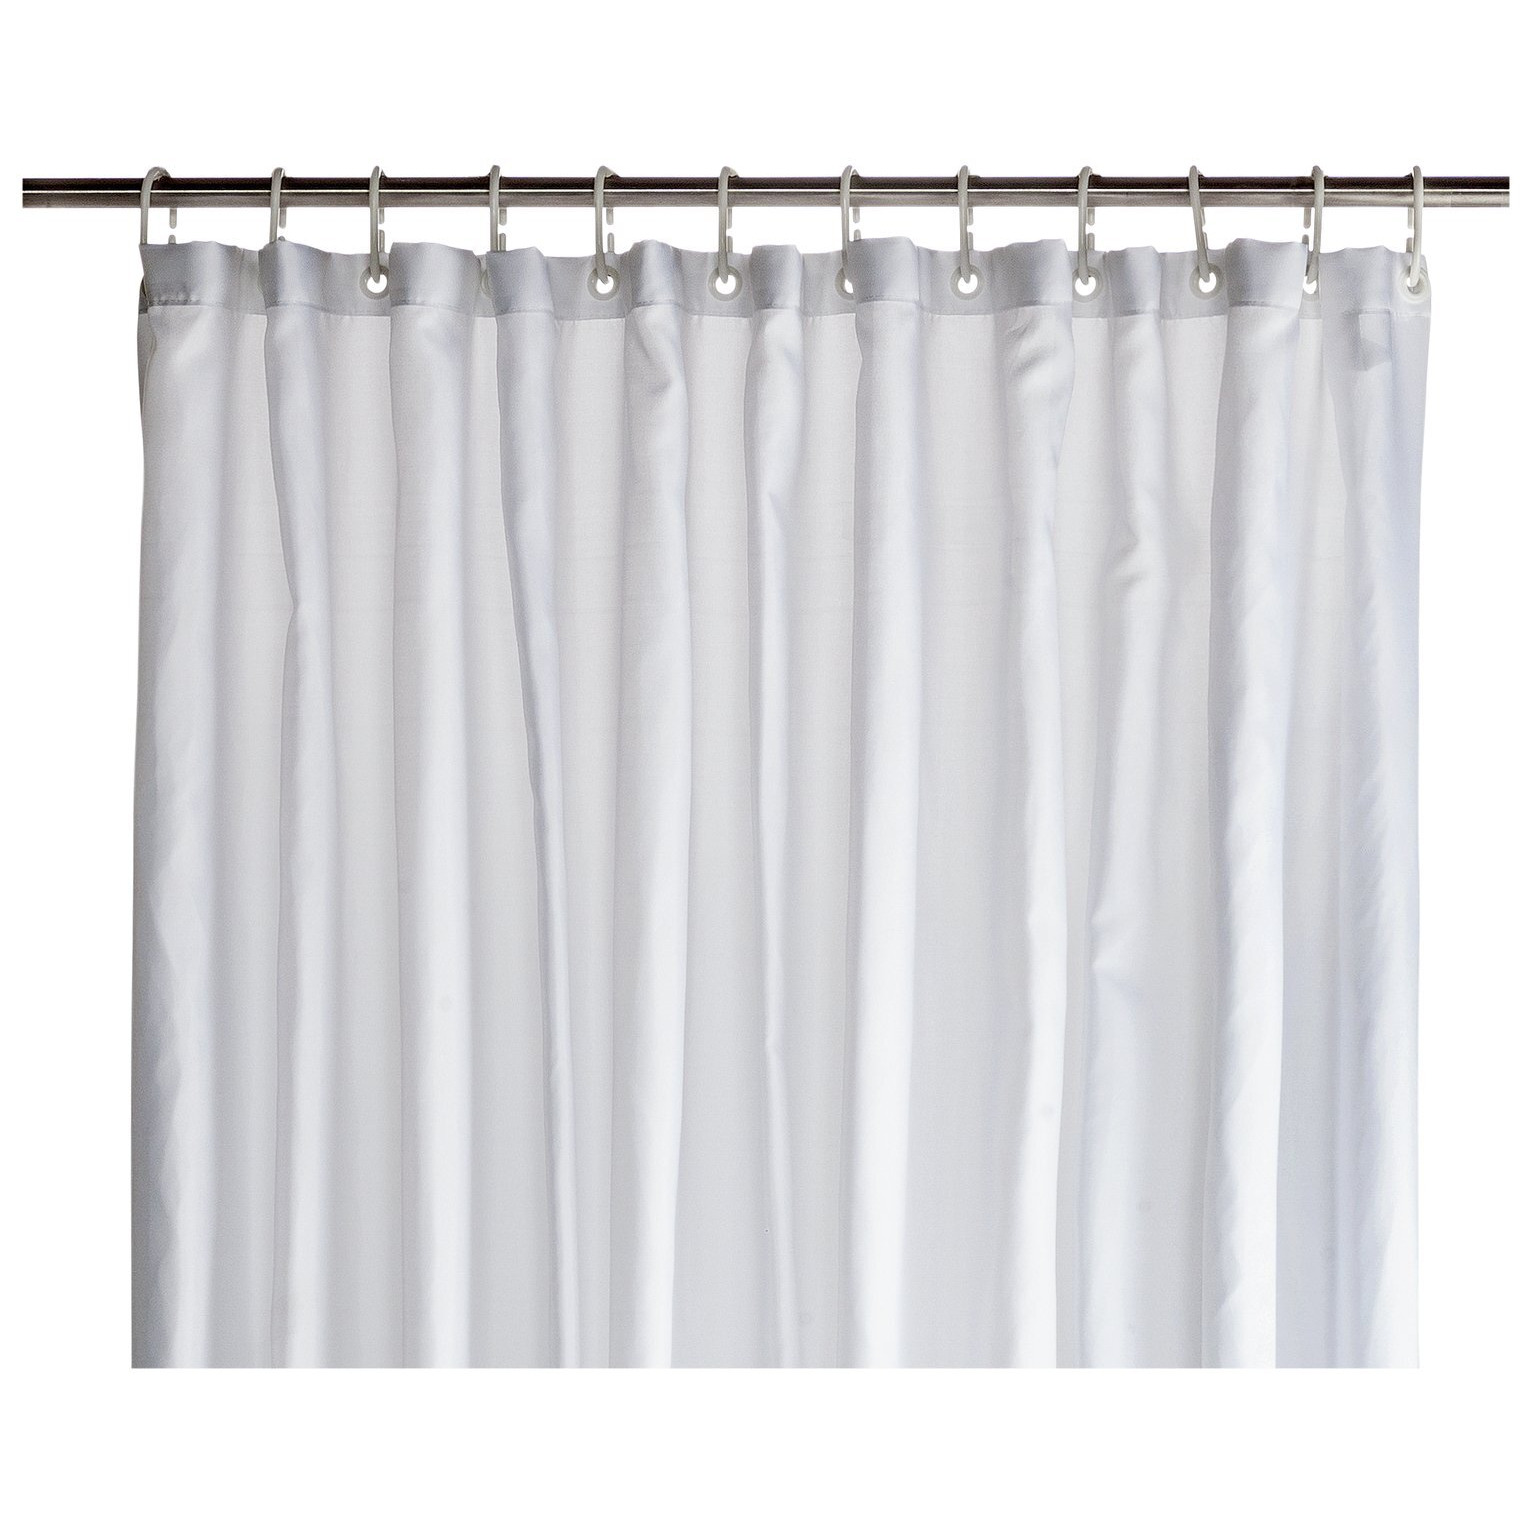 Argos Home Shower Curtain with Anti Bacterial Finish - White - image 1